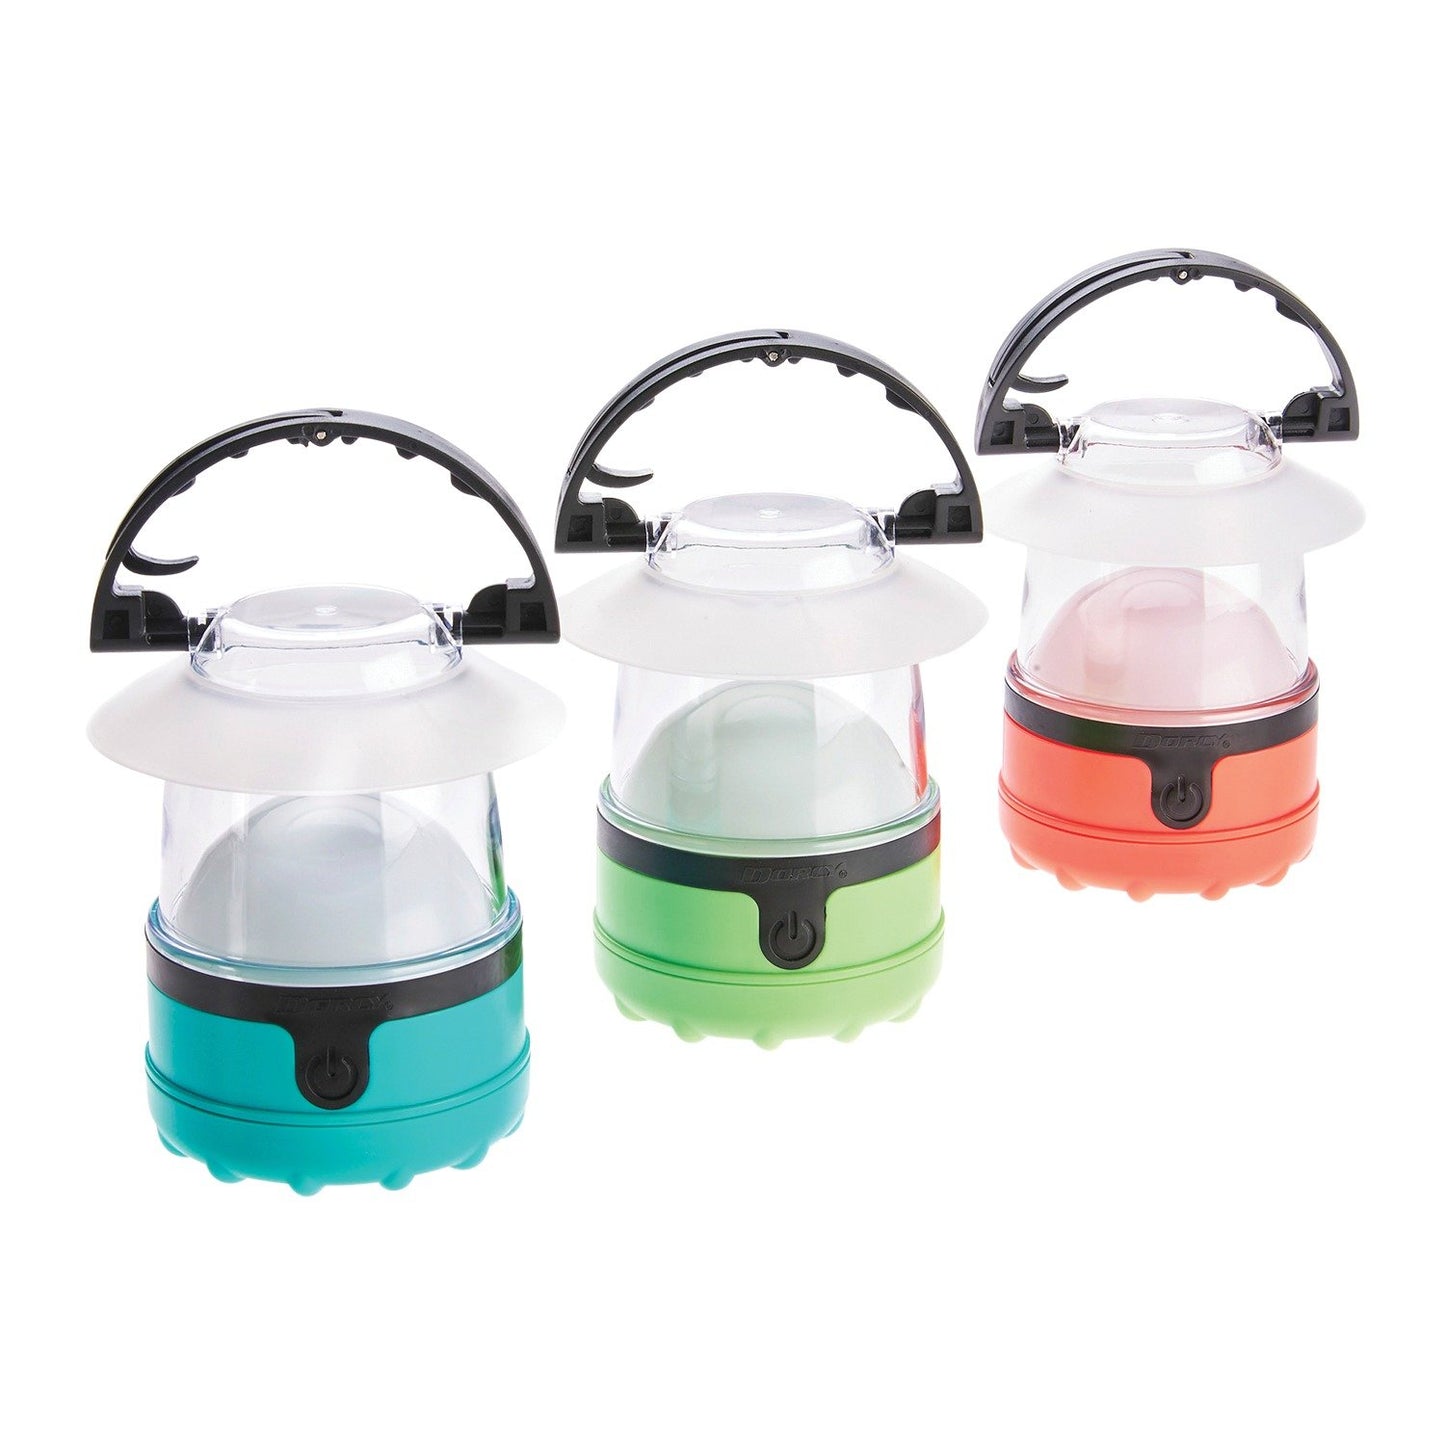 Dorcy 41-3019 LED Mini Lanterns with Batteries, 3 Pack